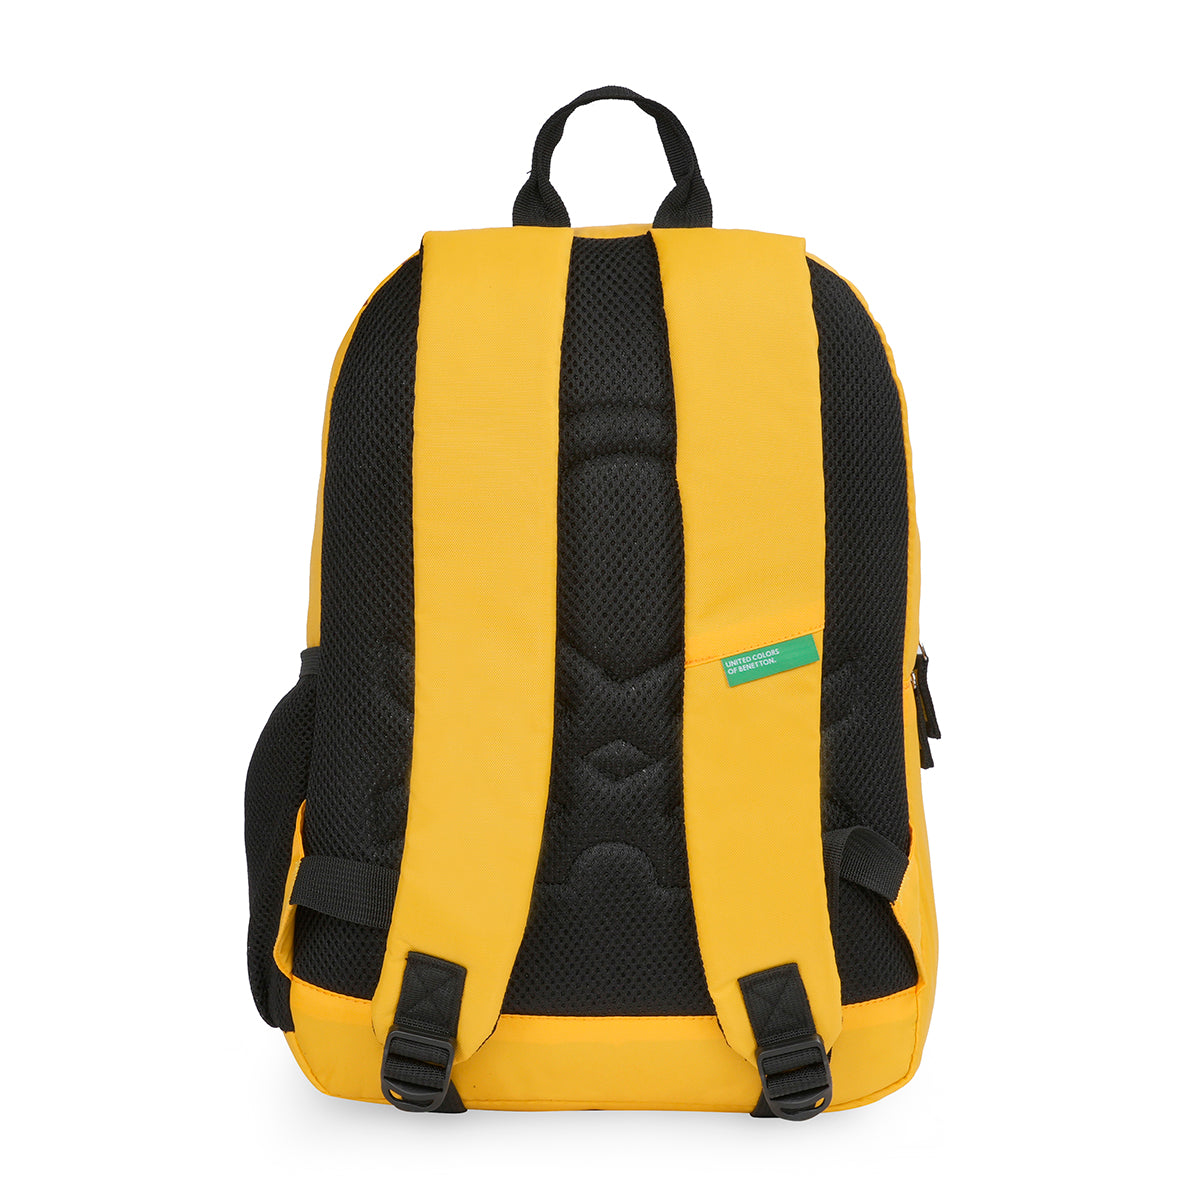 United Colors of Benetton Breeze Back to School Backpack Yellow